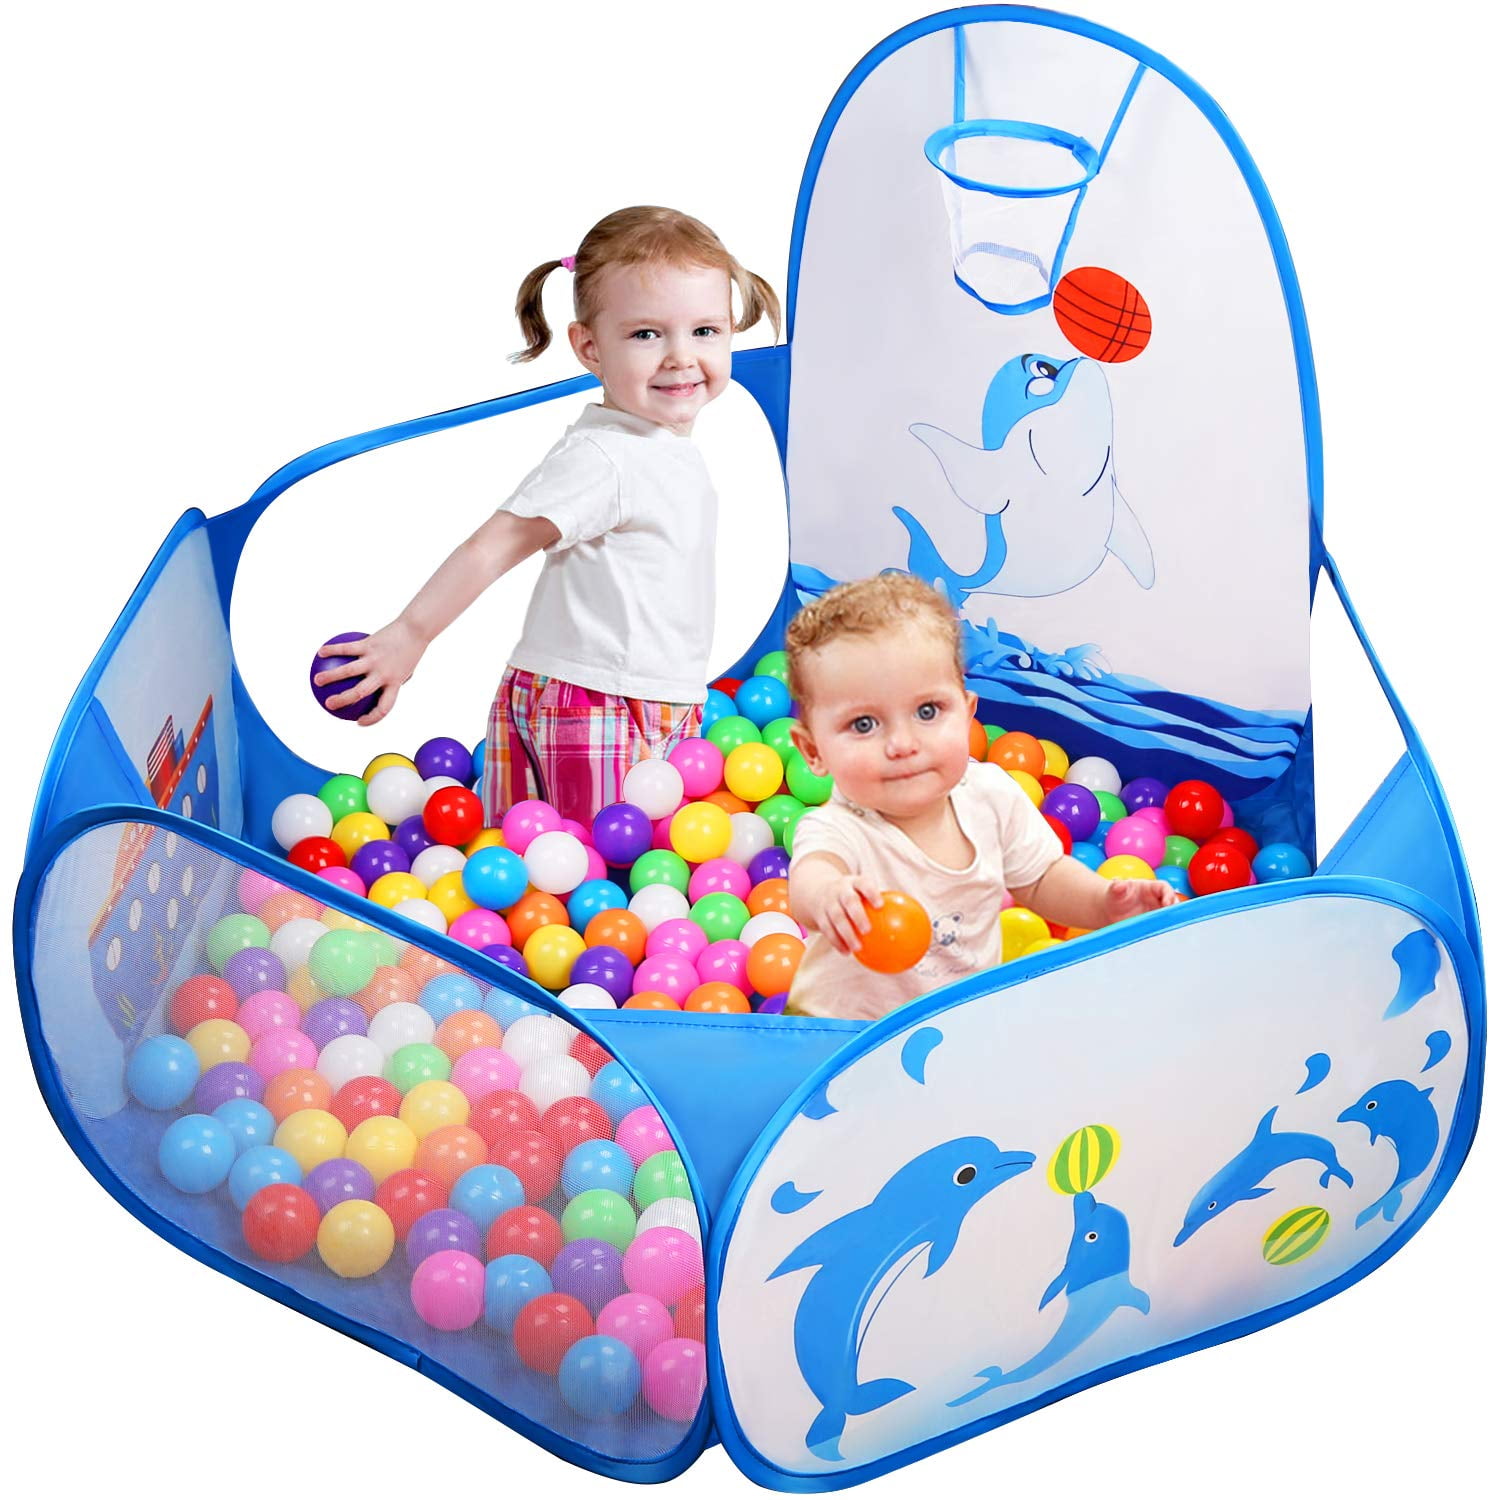 Heboland Ball Pit with Basketball Hoop Pop Up for Kids Toddlers Babies Folding Tent Crawl Playpen Ocean Pool Playhouse 4ft/120cm Balls Not Included